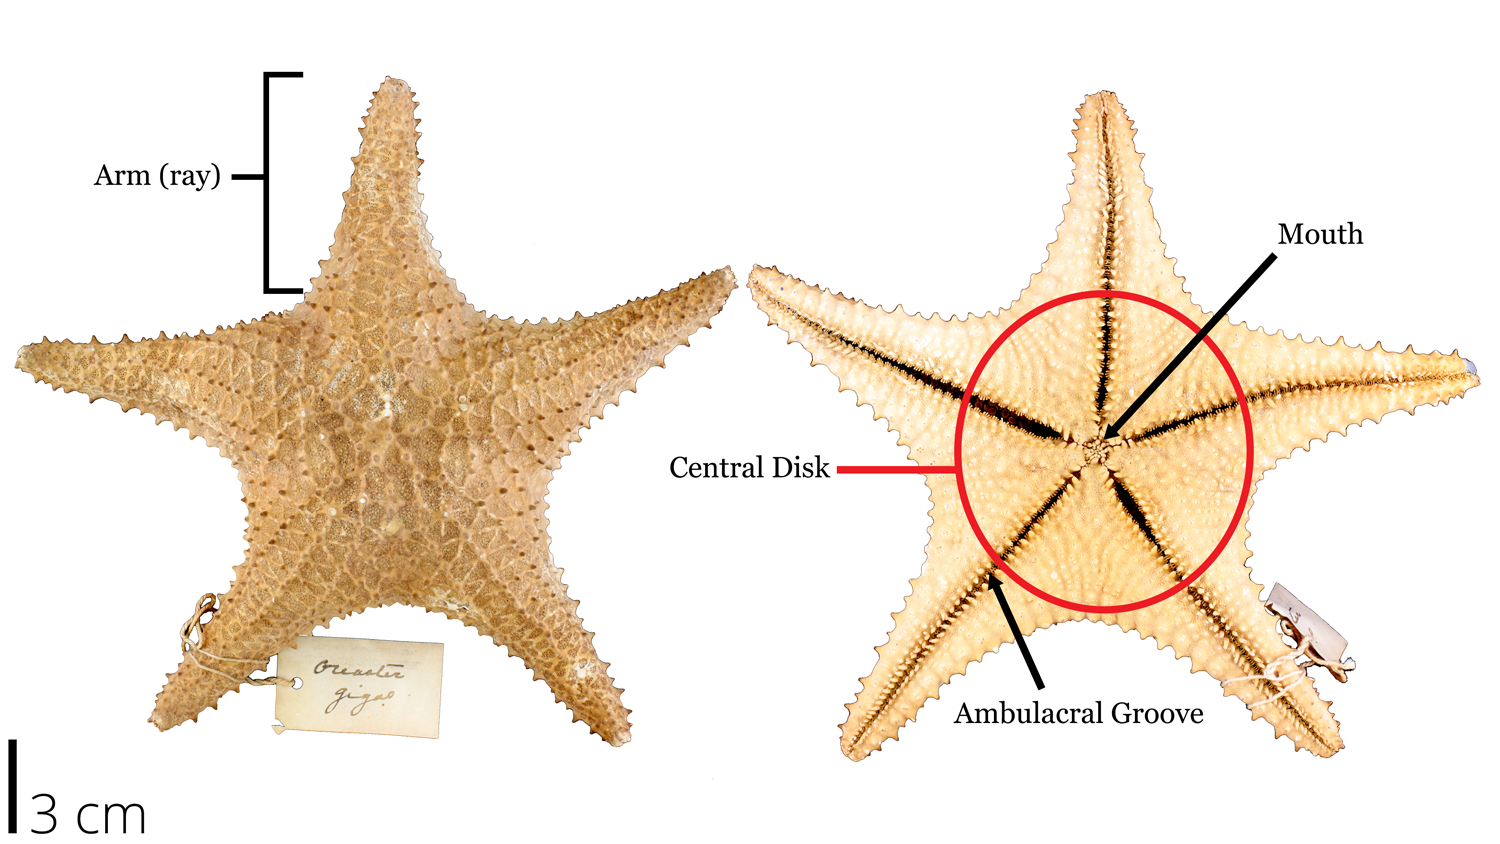 Image of a recent dried out sea star with labelled morphology